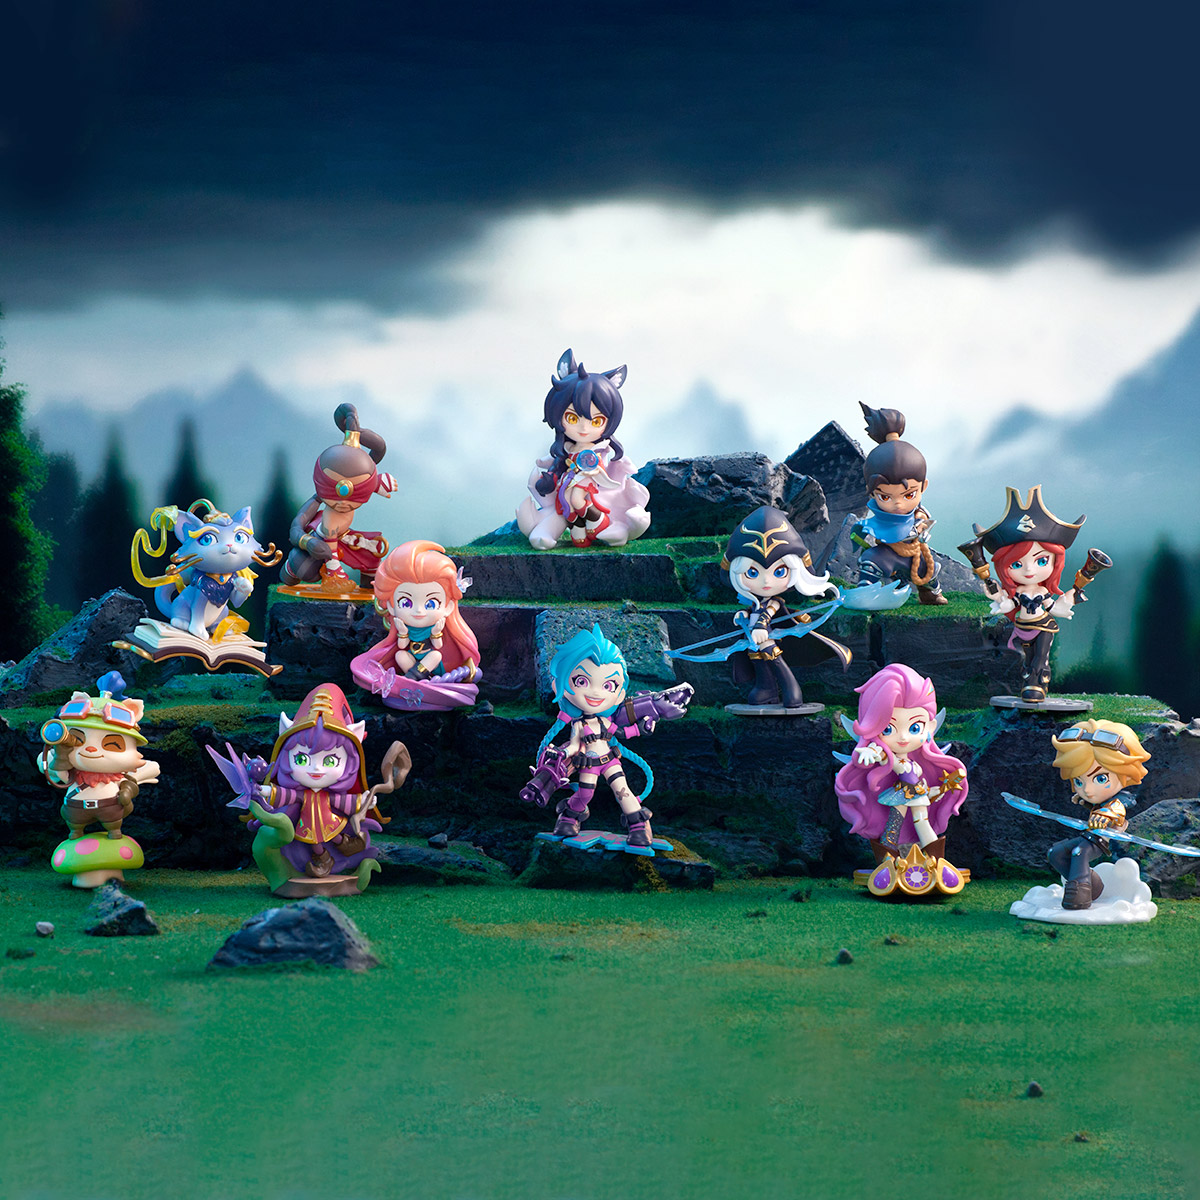 League of Legends Classic Characters Series Figures - Blind Box - POP MART  (United States)